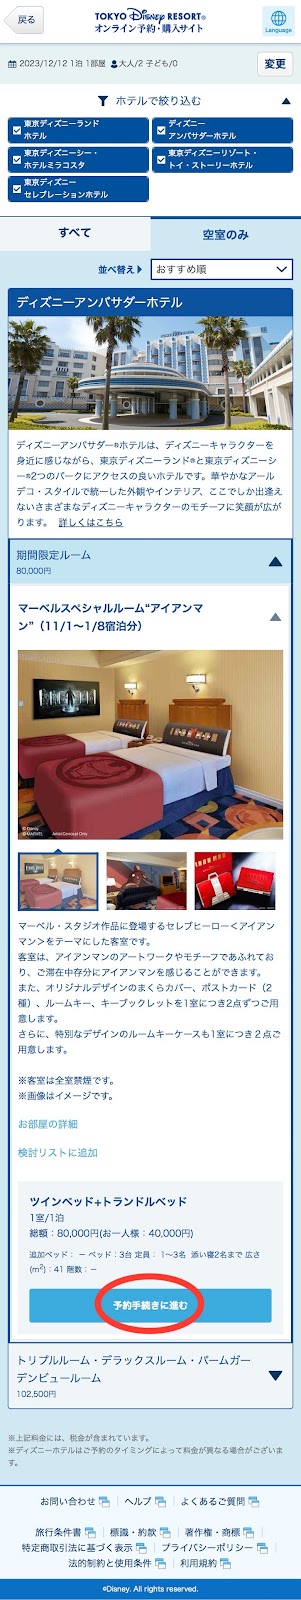 How to reserve a Disney hotel